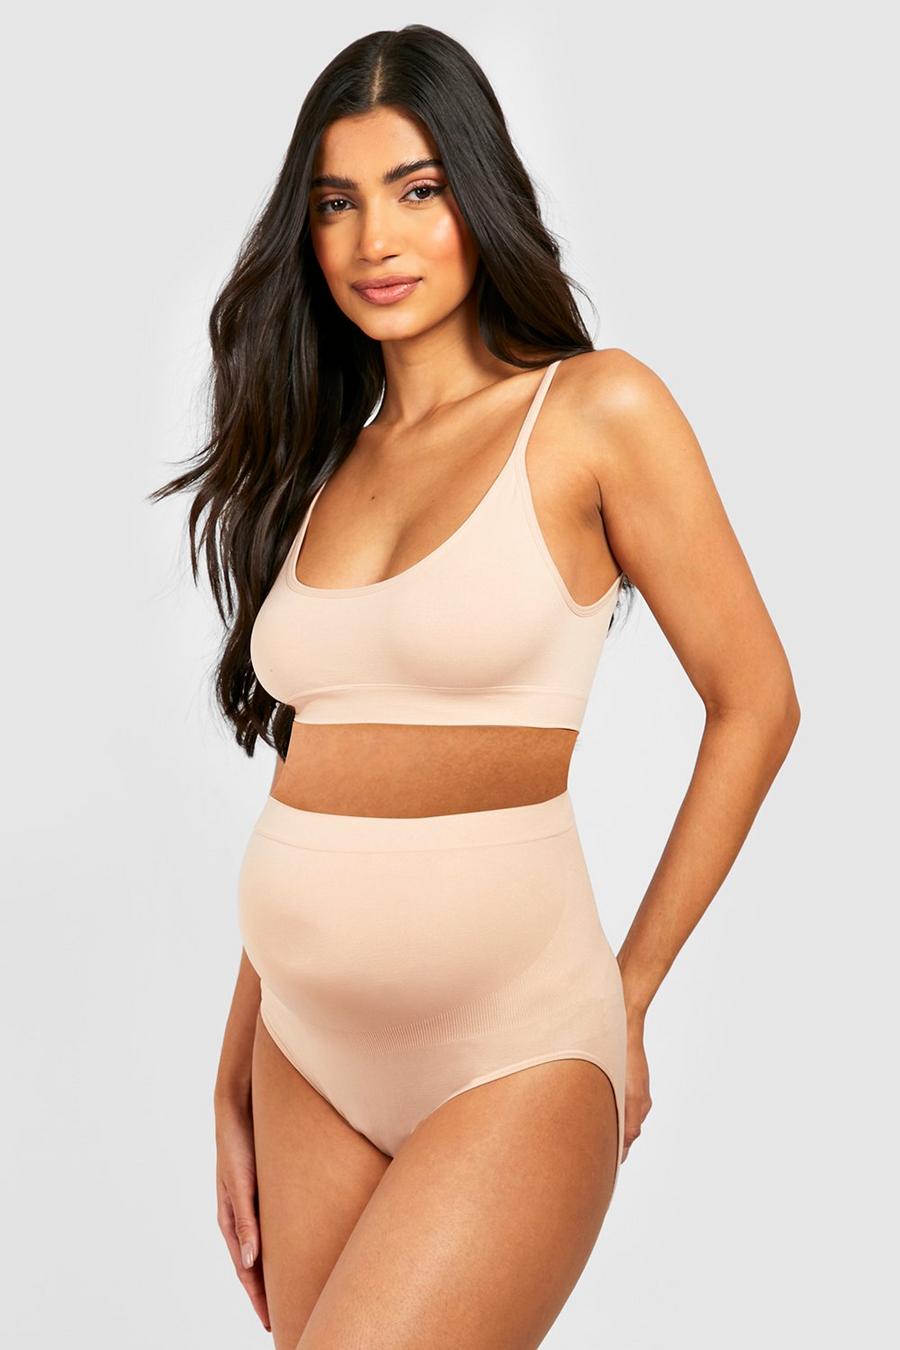 Buy Boohoo Pack Of 2 Maternity Cotton Nursing Bralettes In White